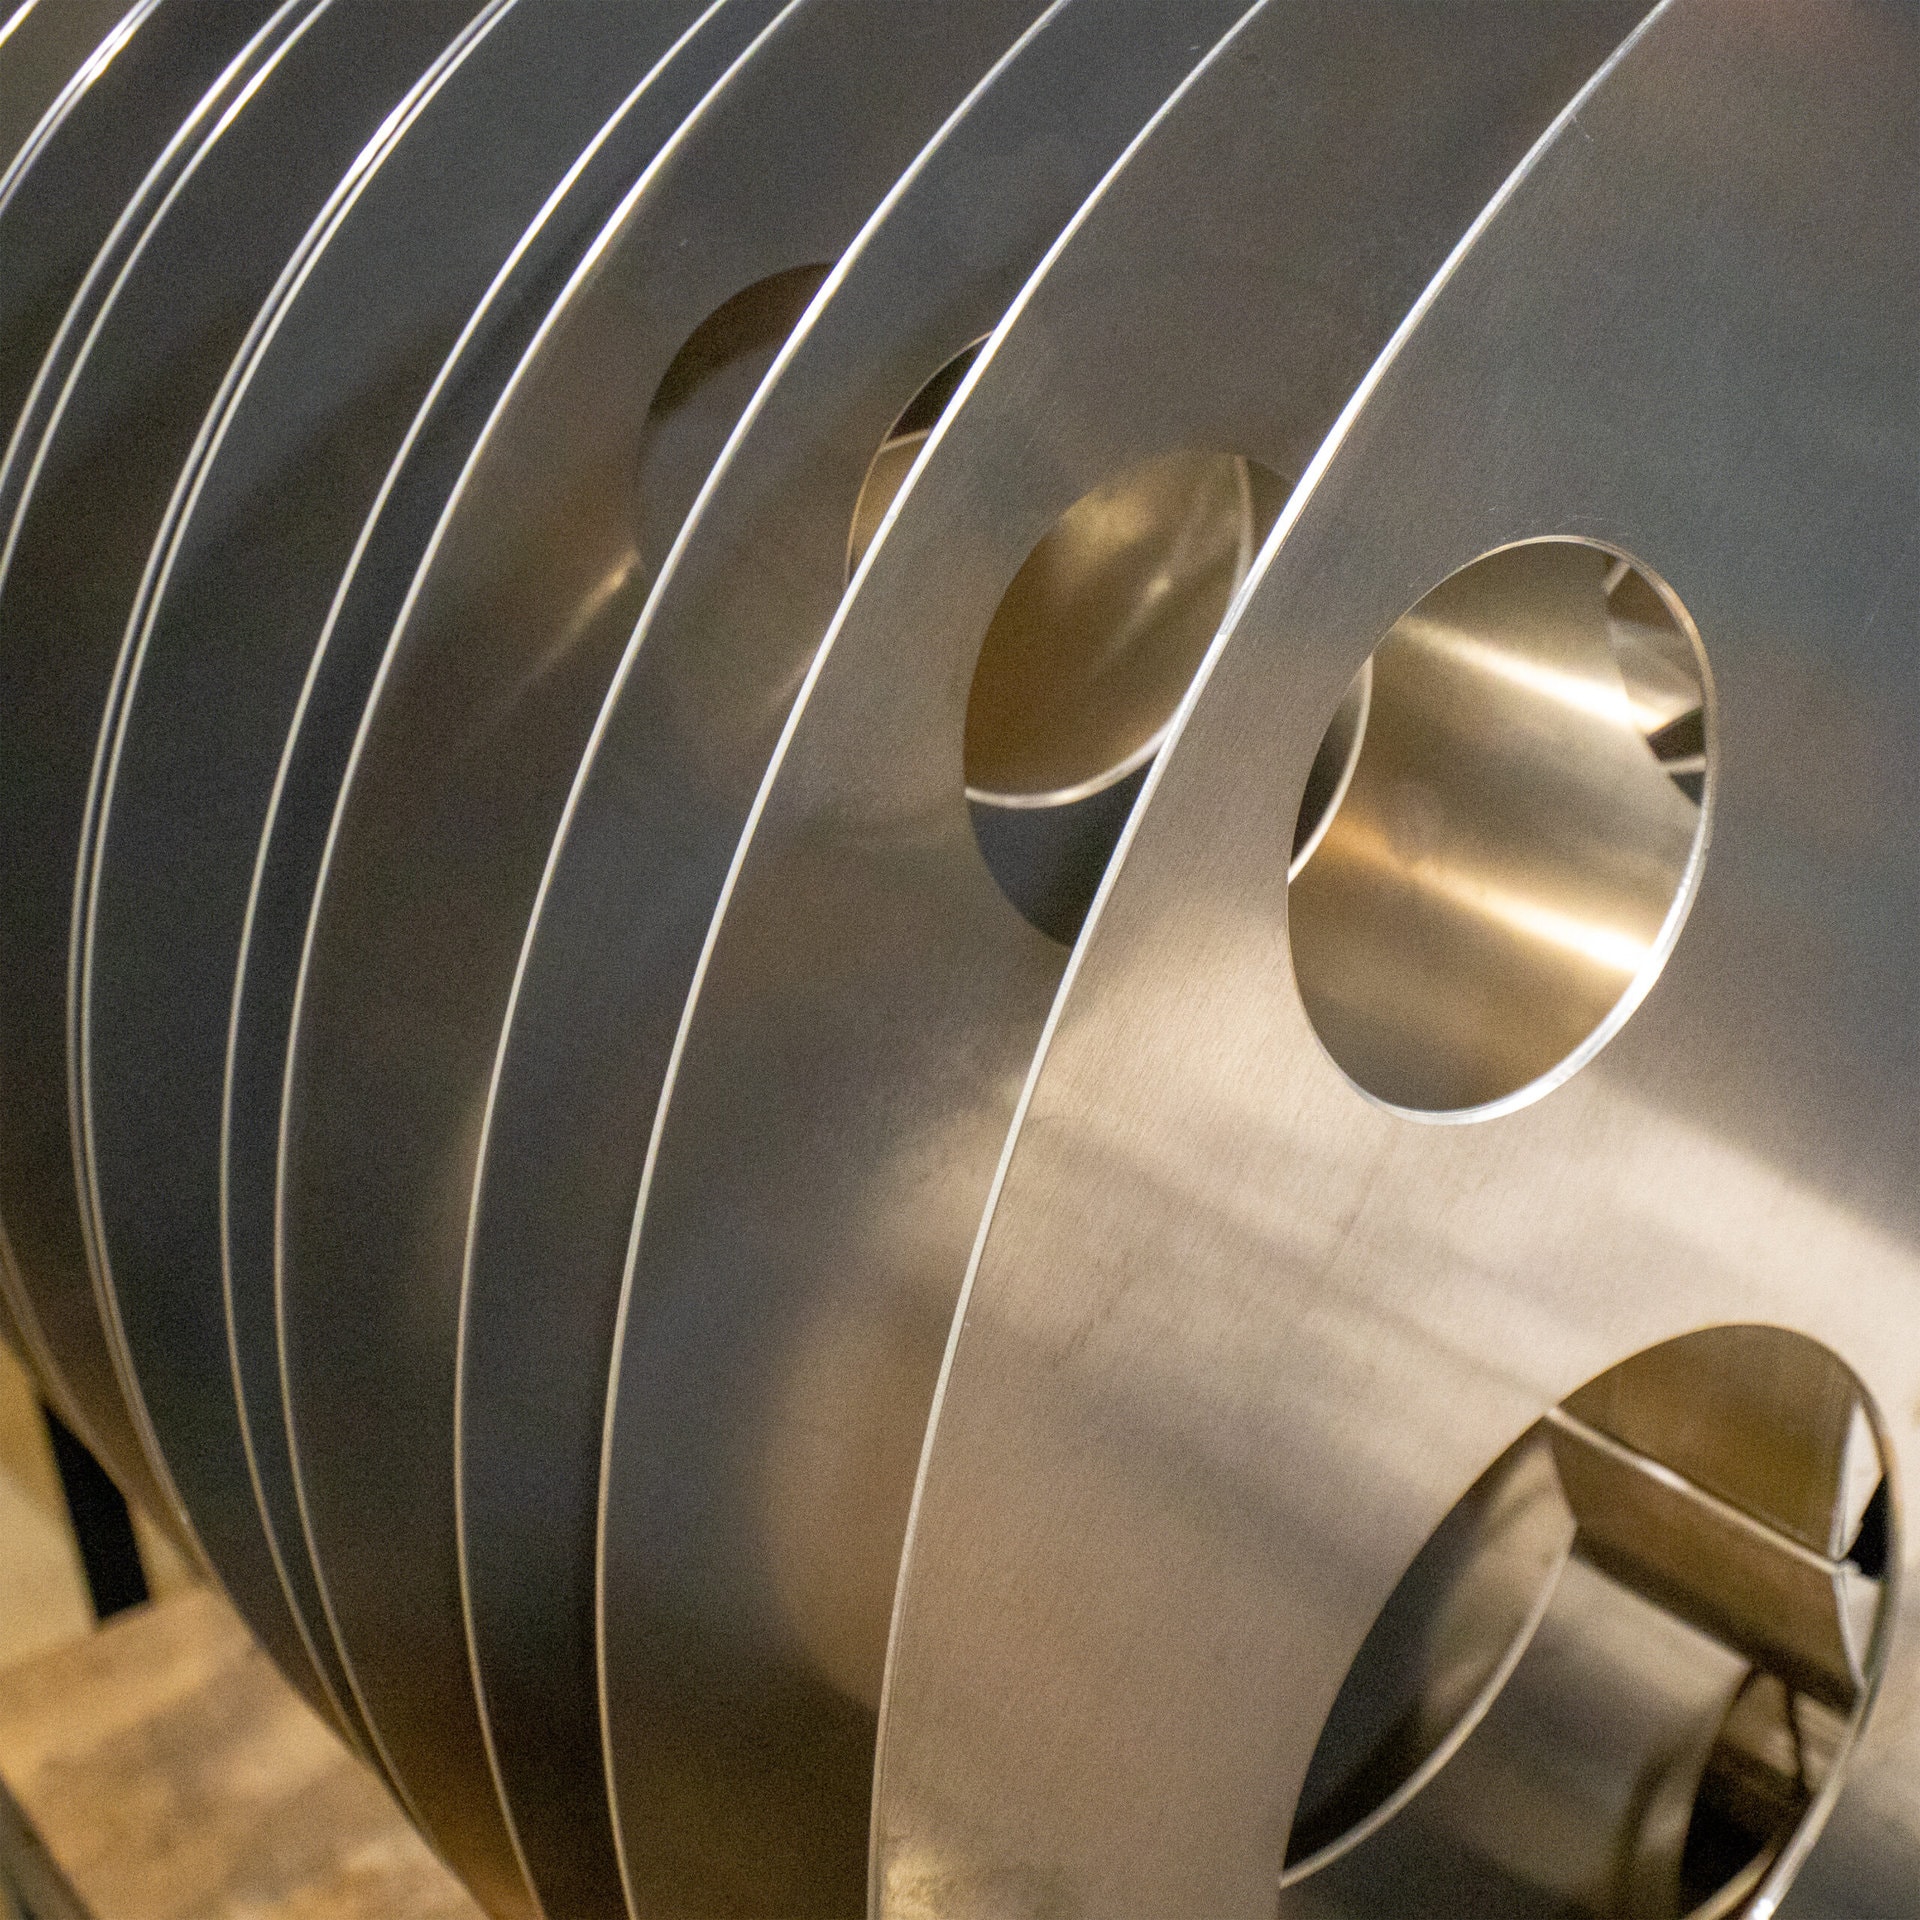 closeup image of several newly-made 70mm aluminum film reels awaiting inspection